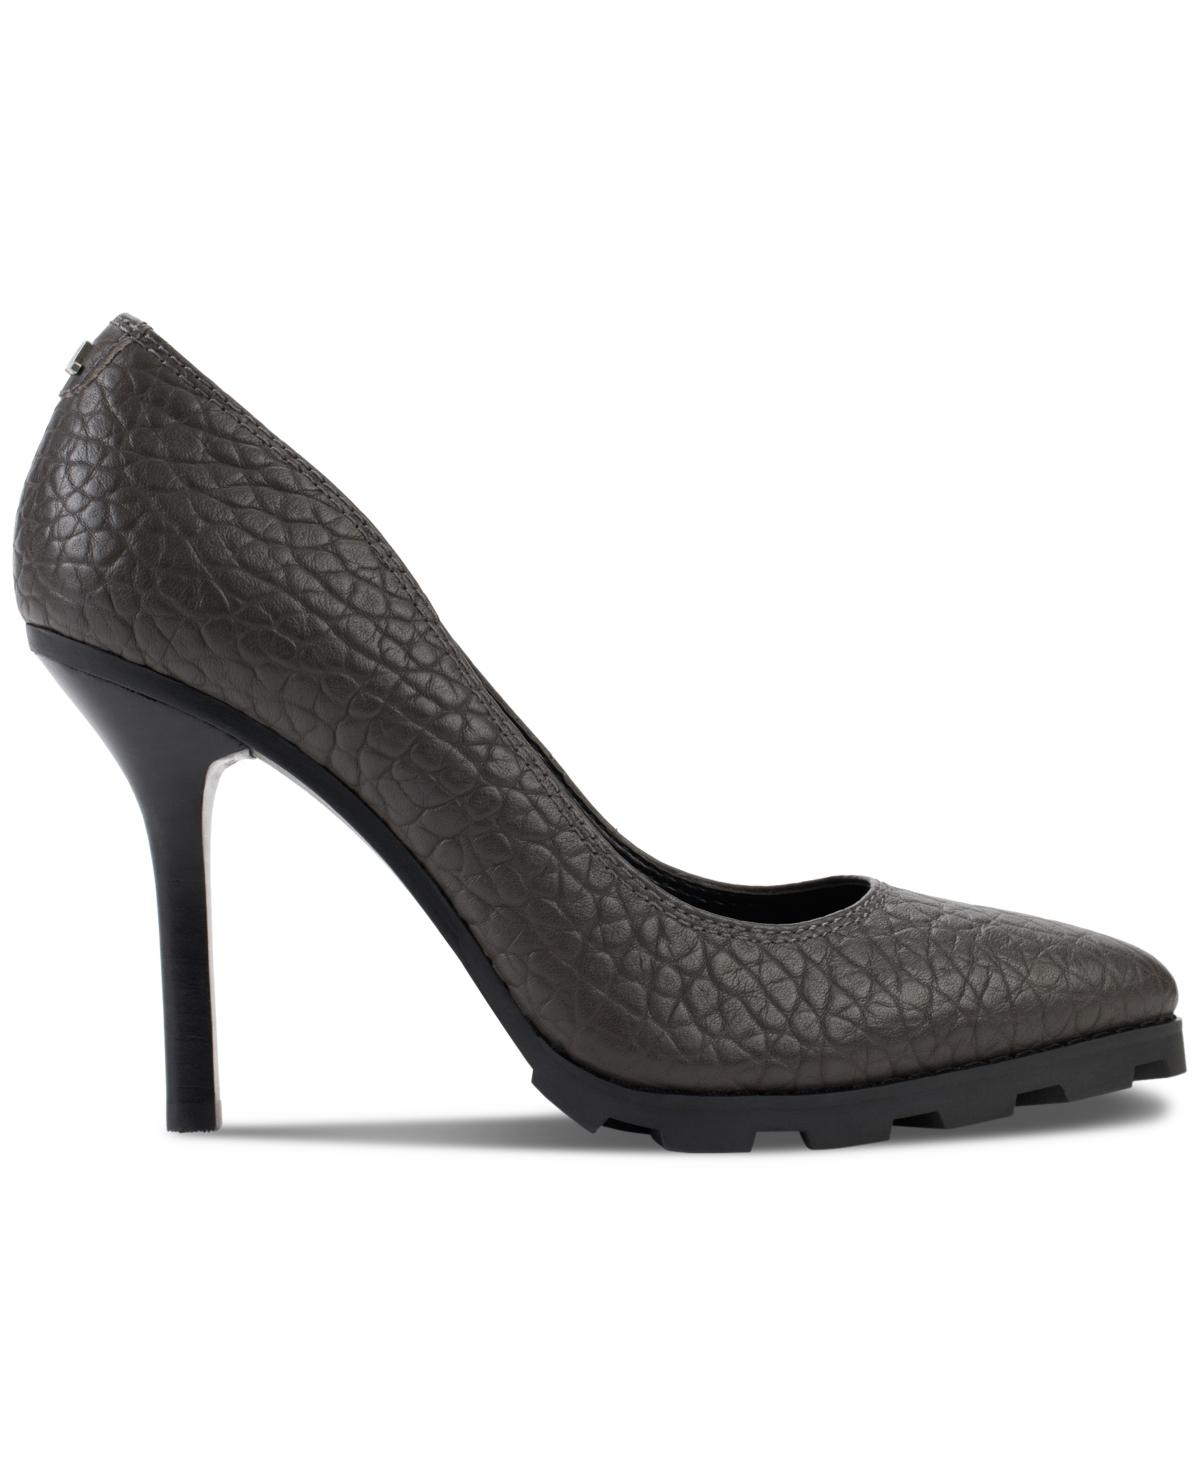 Karl Lagerfeld Madelyn Slip On Pointed Toe Pumps in Black | Lyst